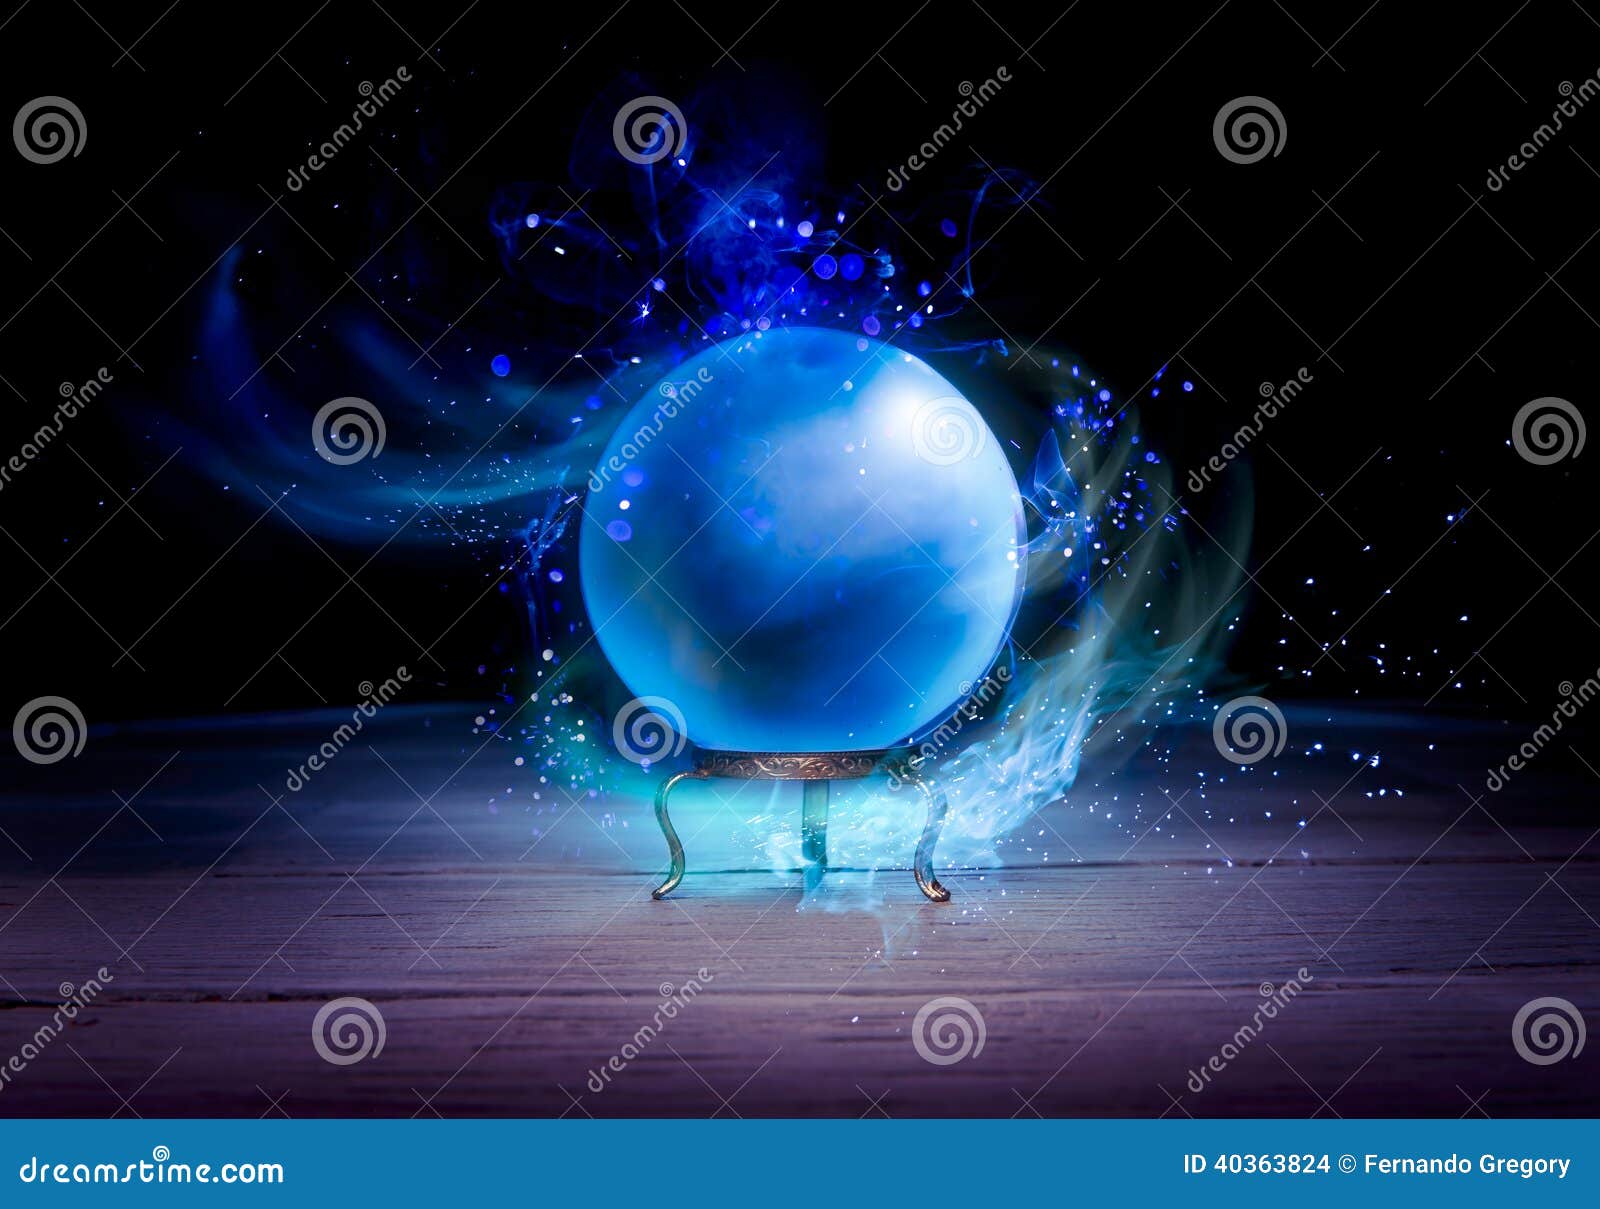 fortune teller's crystal ball with dramatic lighting